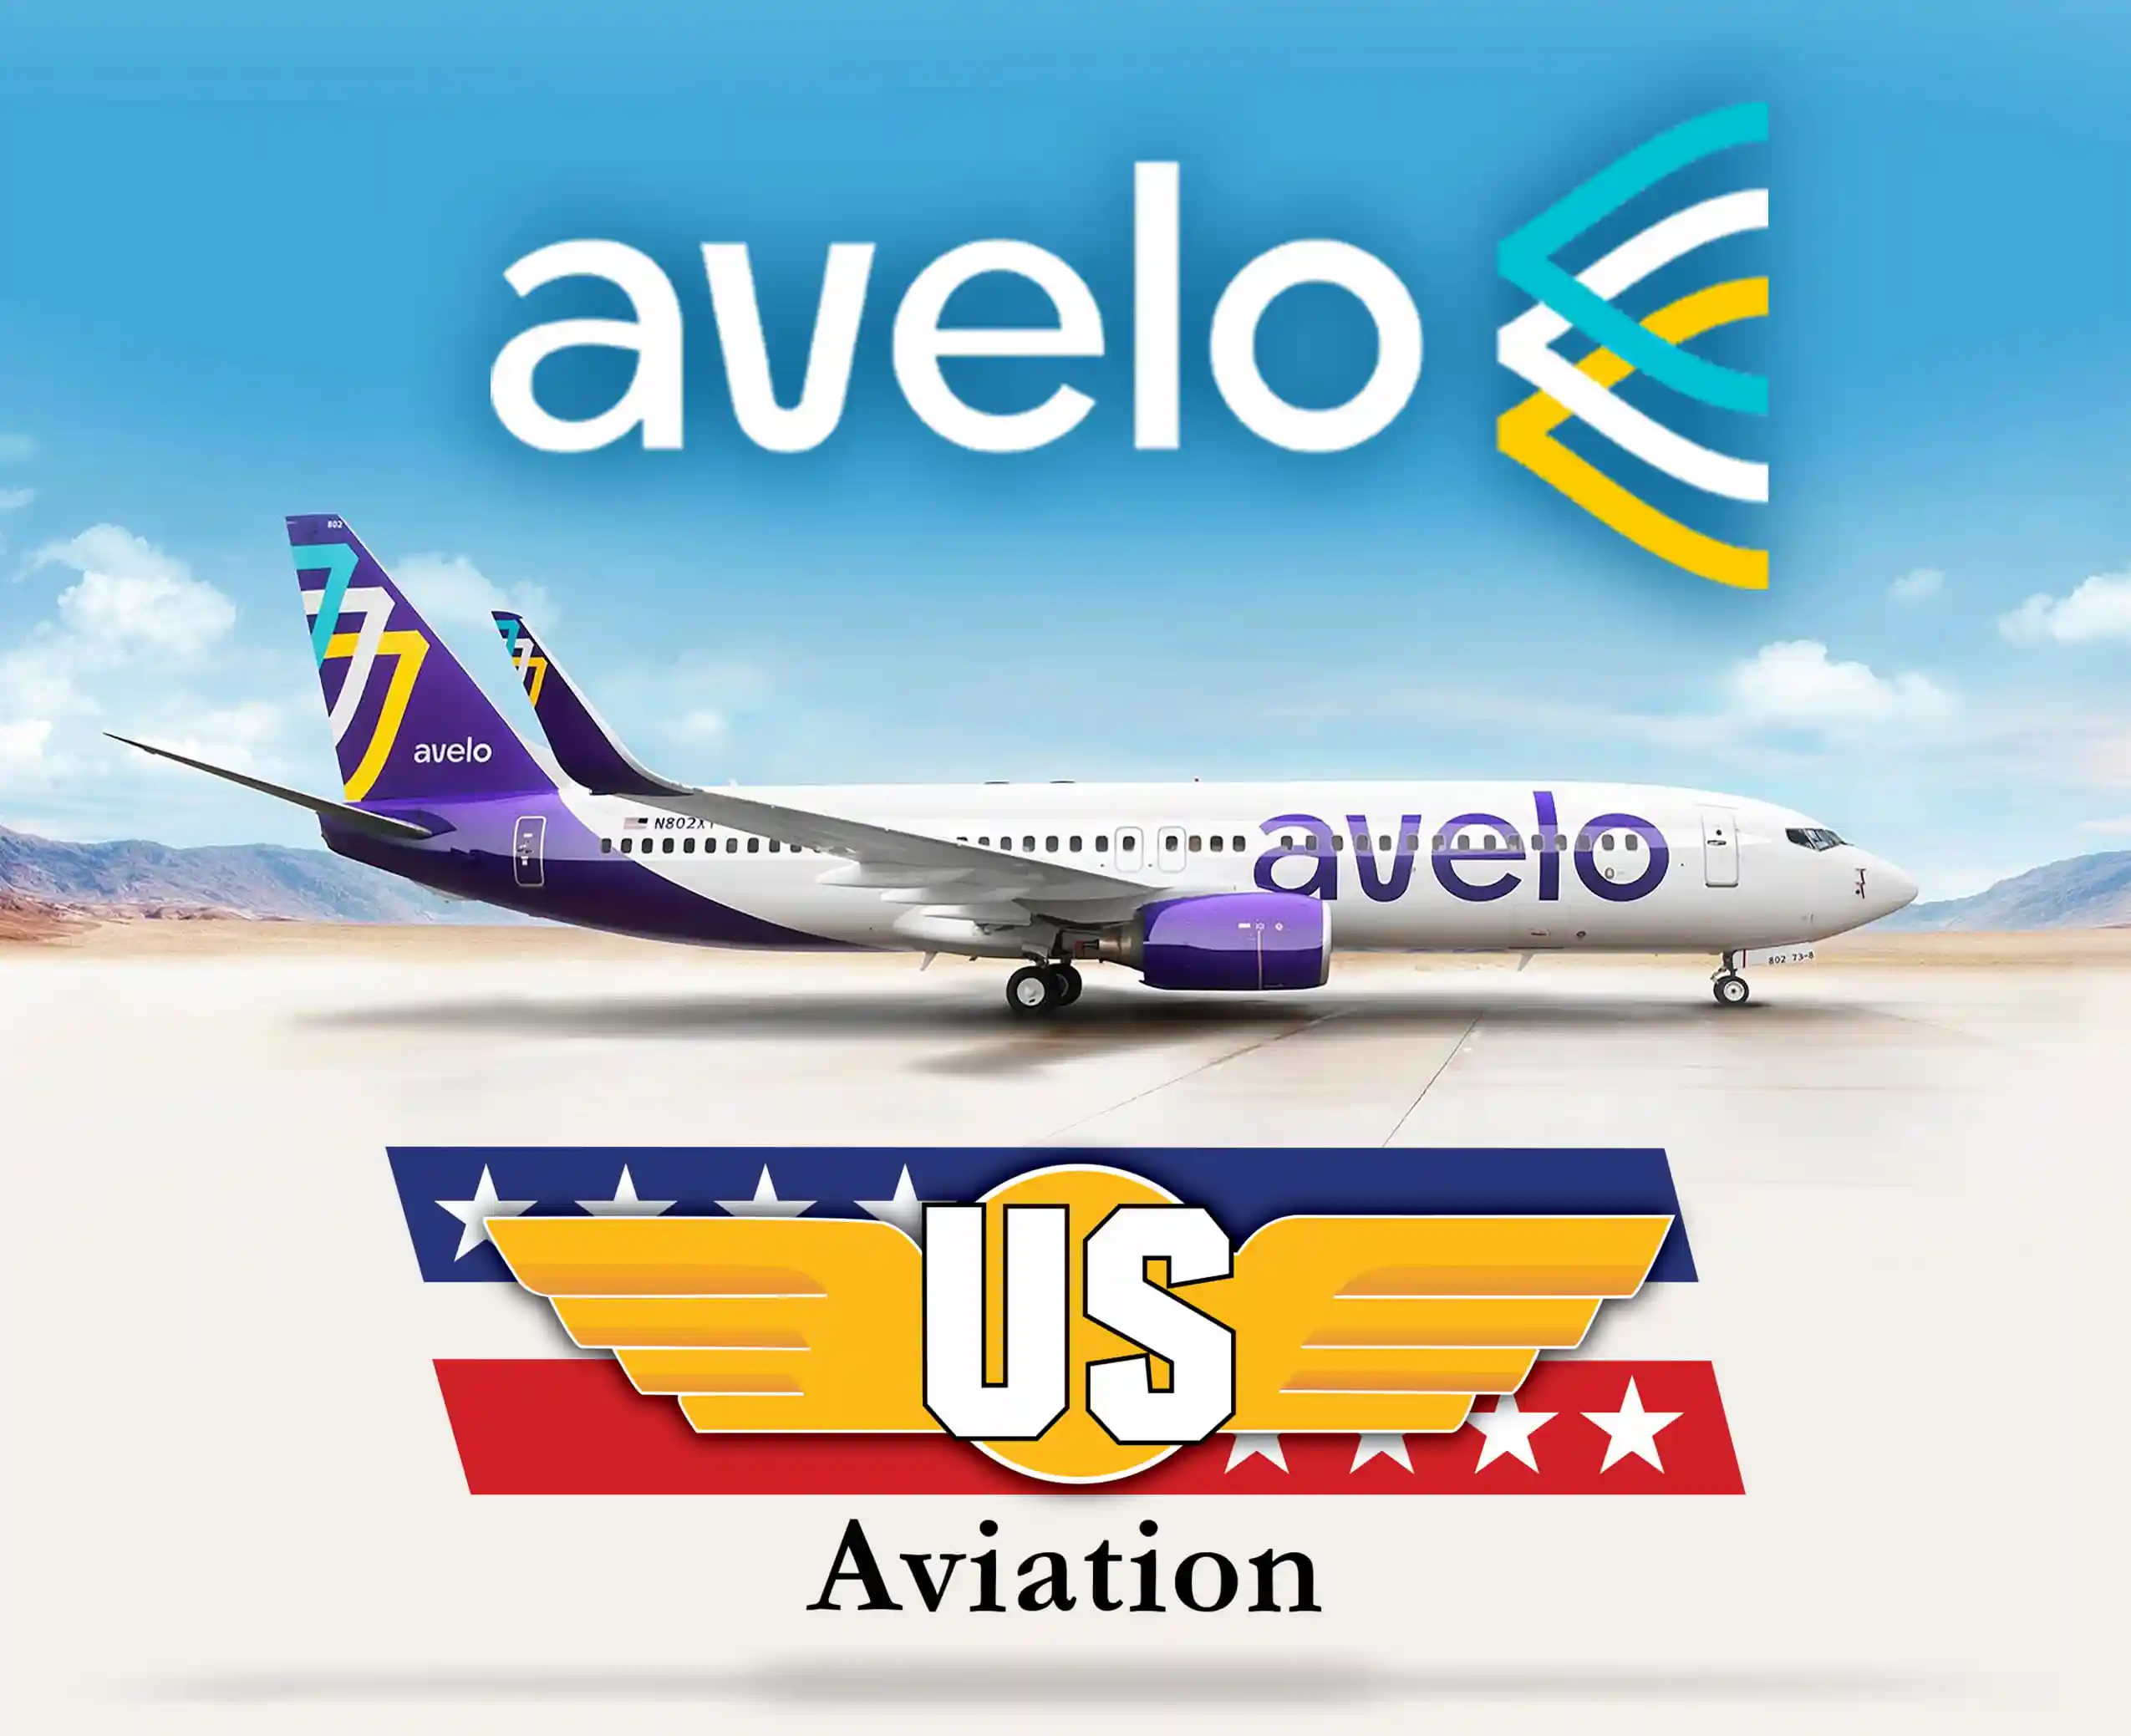 Avelo Airlines Plane on Runway